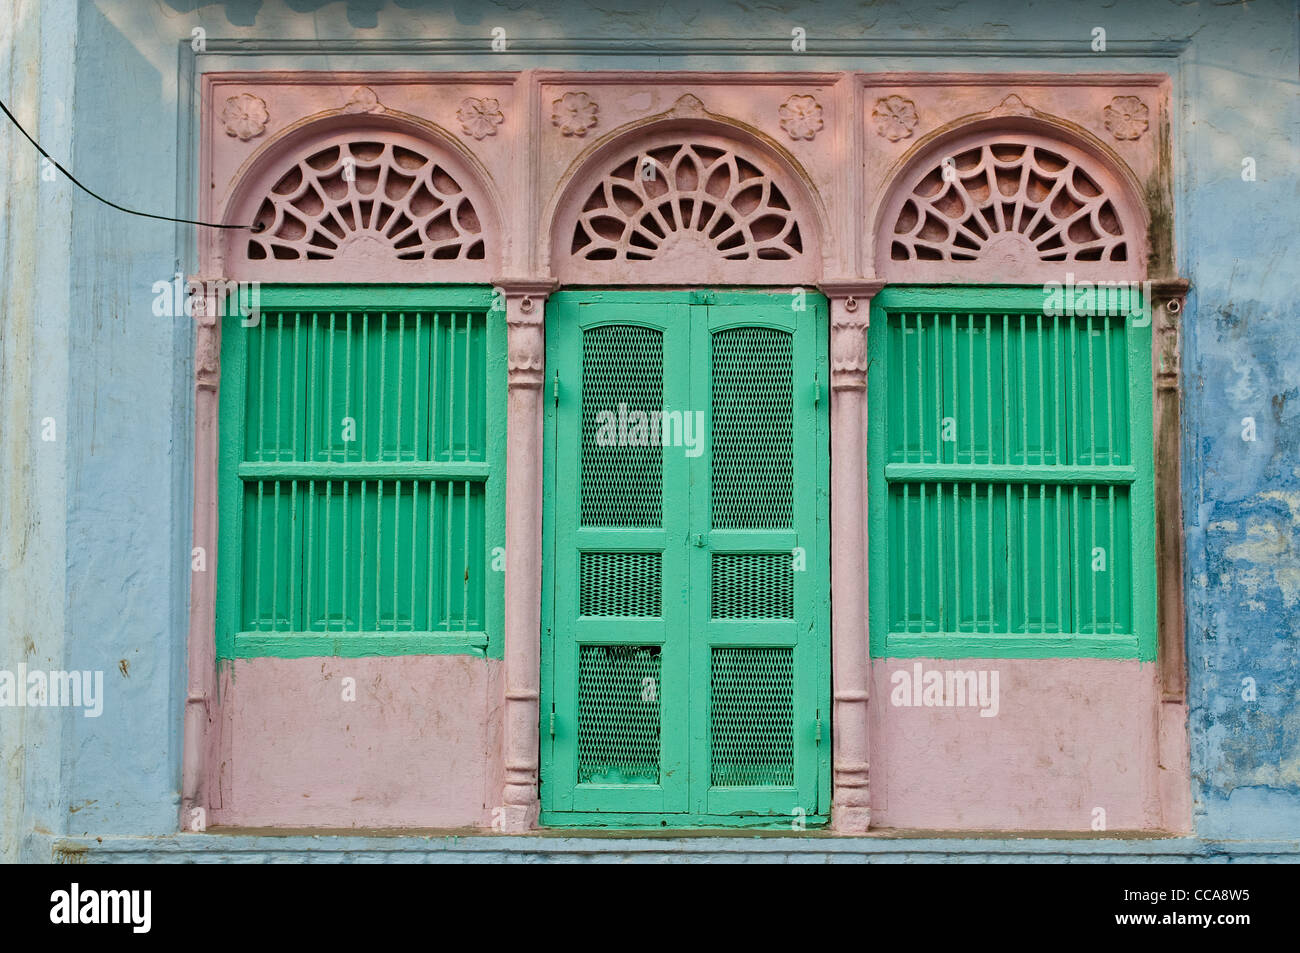 House with green door and windows in a pink frame, Vrindavan, Uttar Pradesh, India Stock Photo